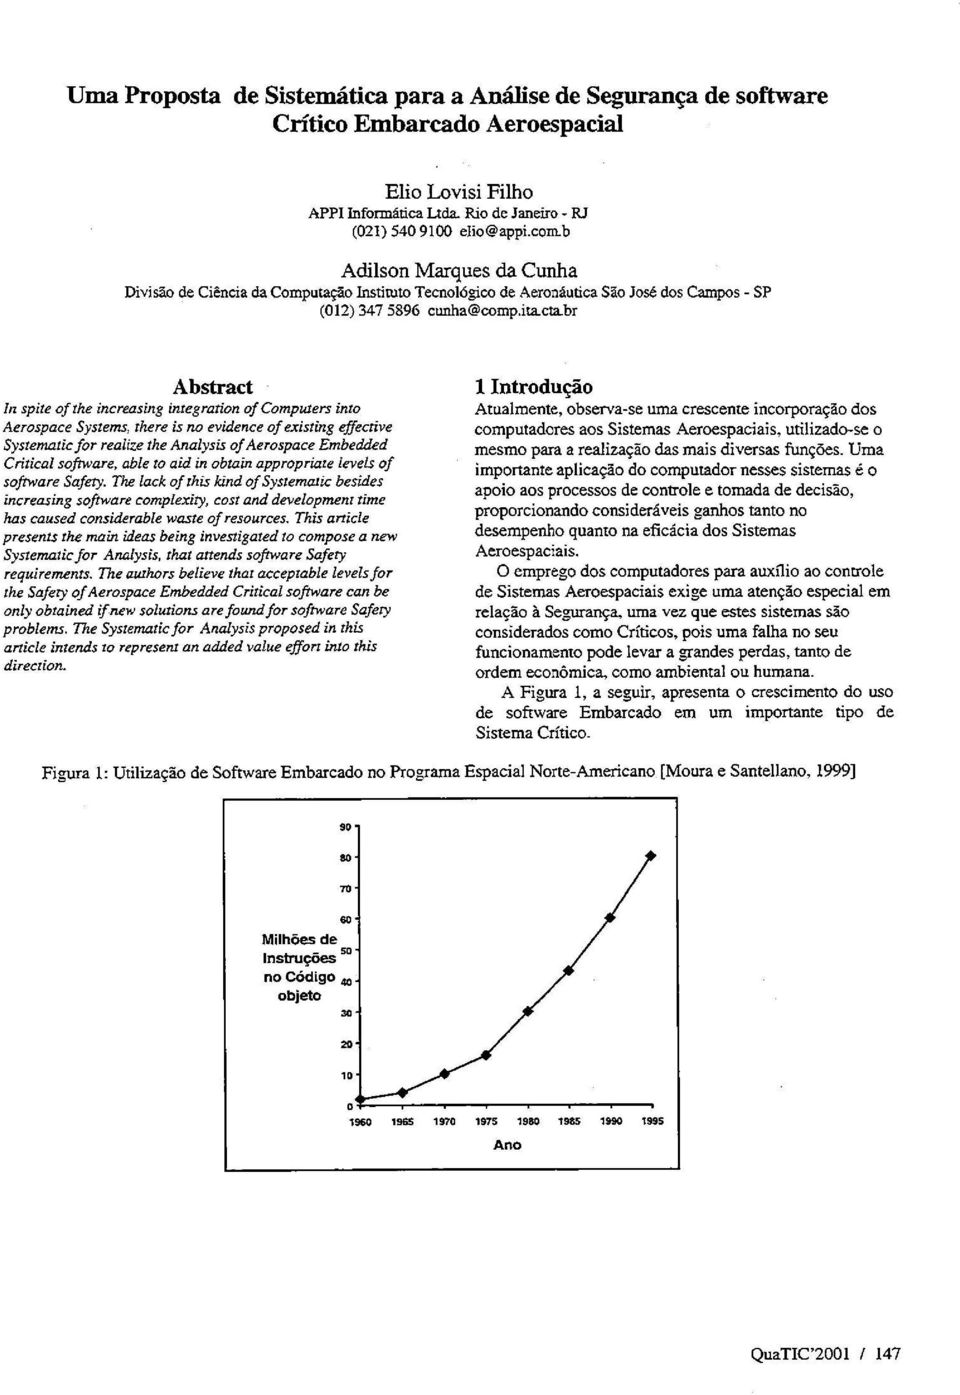 ita cta br Abstract In spz"te of the increasing "mtegran"on of Computers into Aerospace Systems, rhere is no evidence of existing effectz"ve Systematic for real"ize the Analysis of Aerospace Embedded